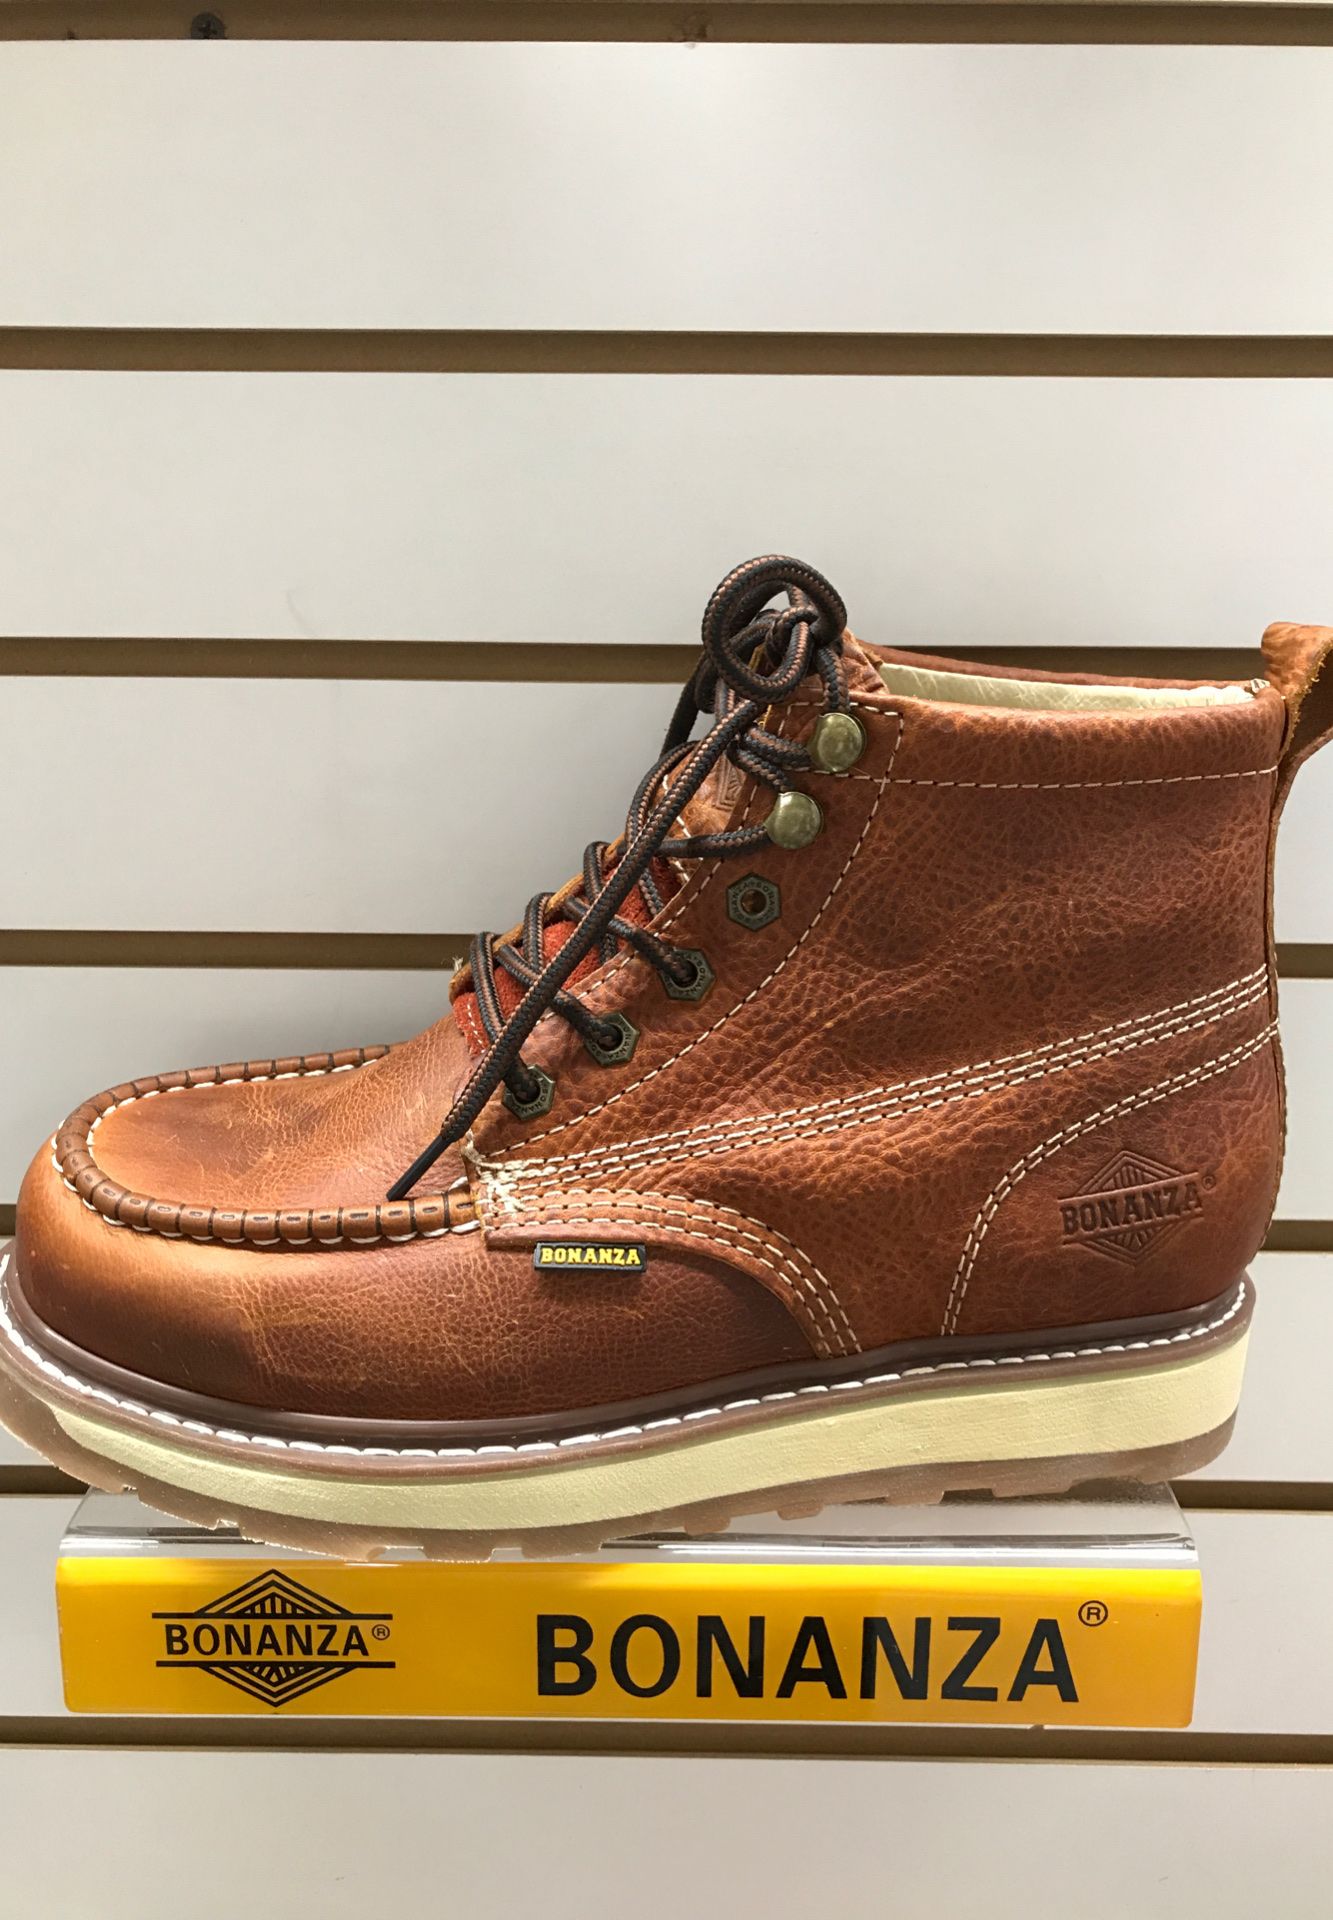 Bonanza work boots, 100% real leather